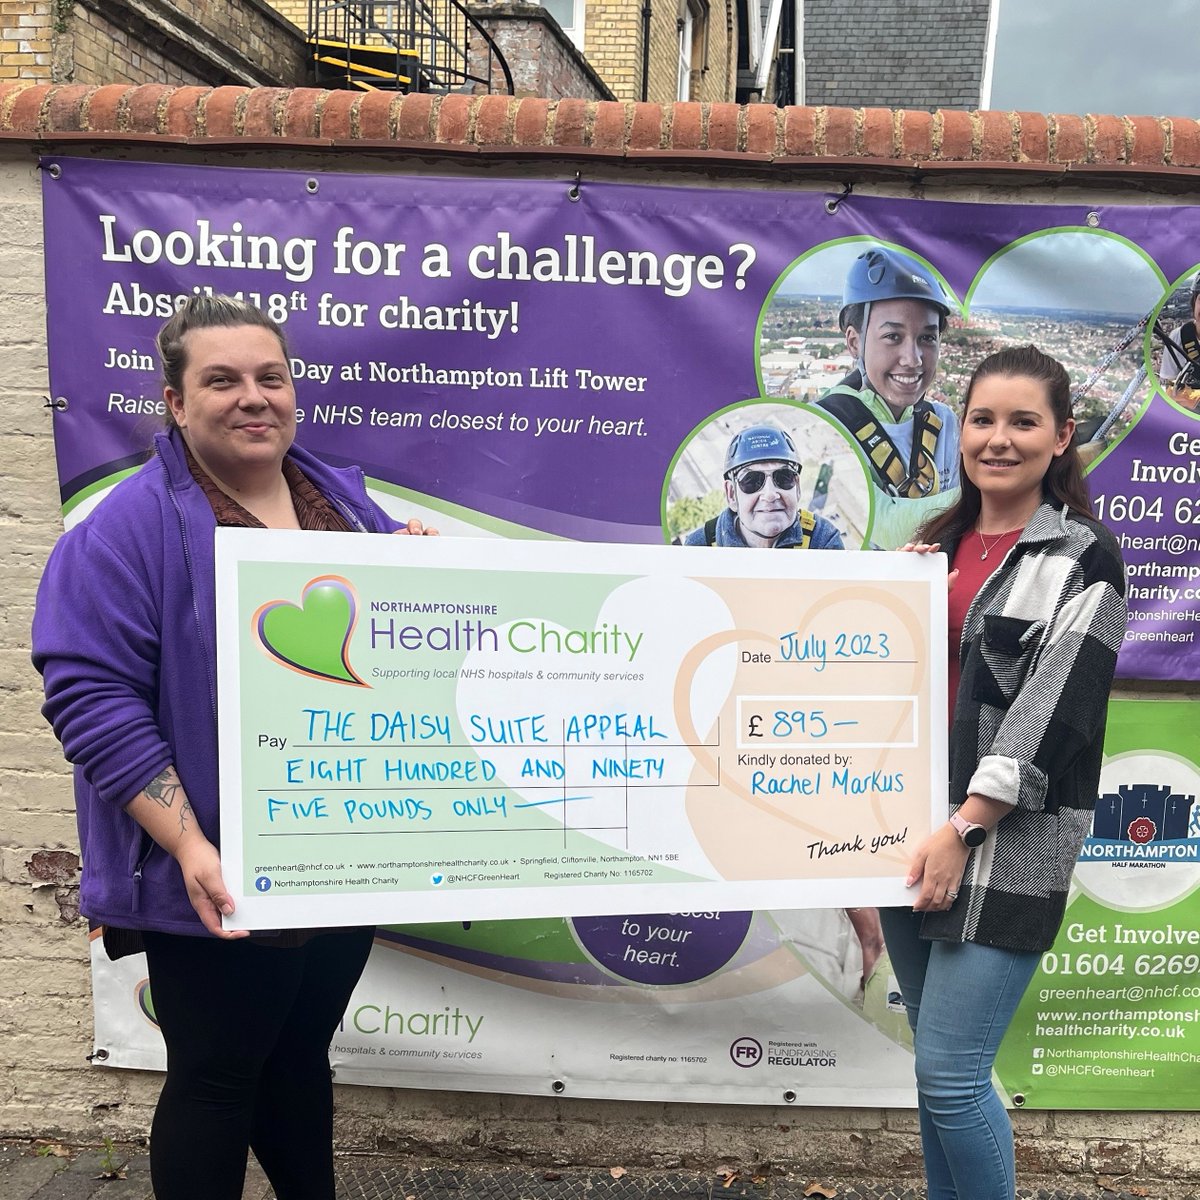 Thank you Rachel for raising a fantastic £895 for The Daisy Suite Appeal with your 3 challenges before 30! 

Half Marathon ✔️
Abseil ✔️
Skydive ✔️

You smashed it!💚

#fundraise #nhscharity #donate #supportlocal #event #challenges